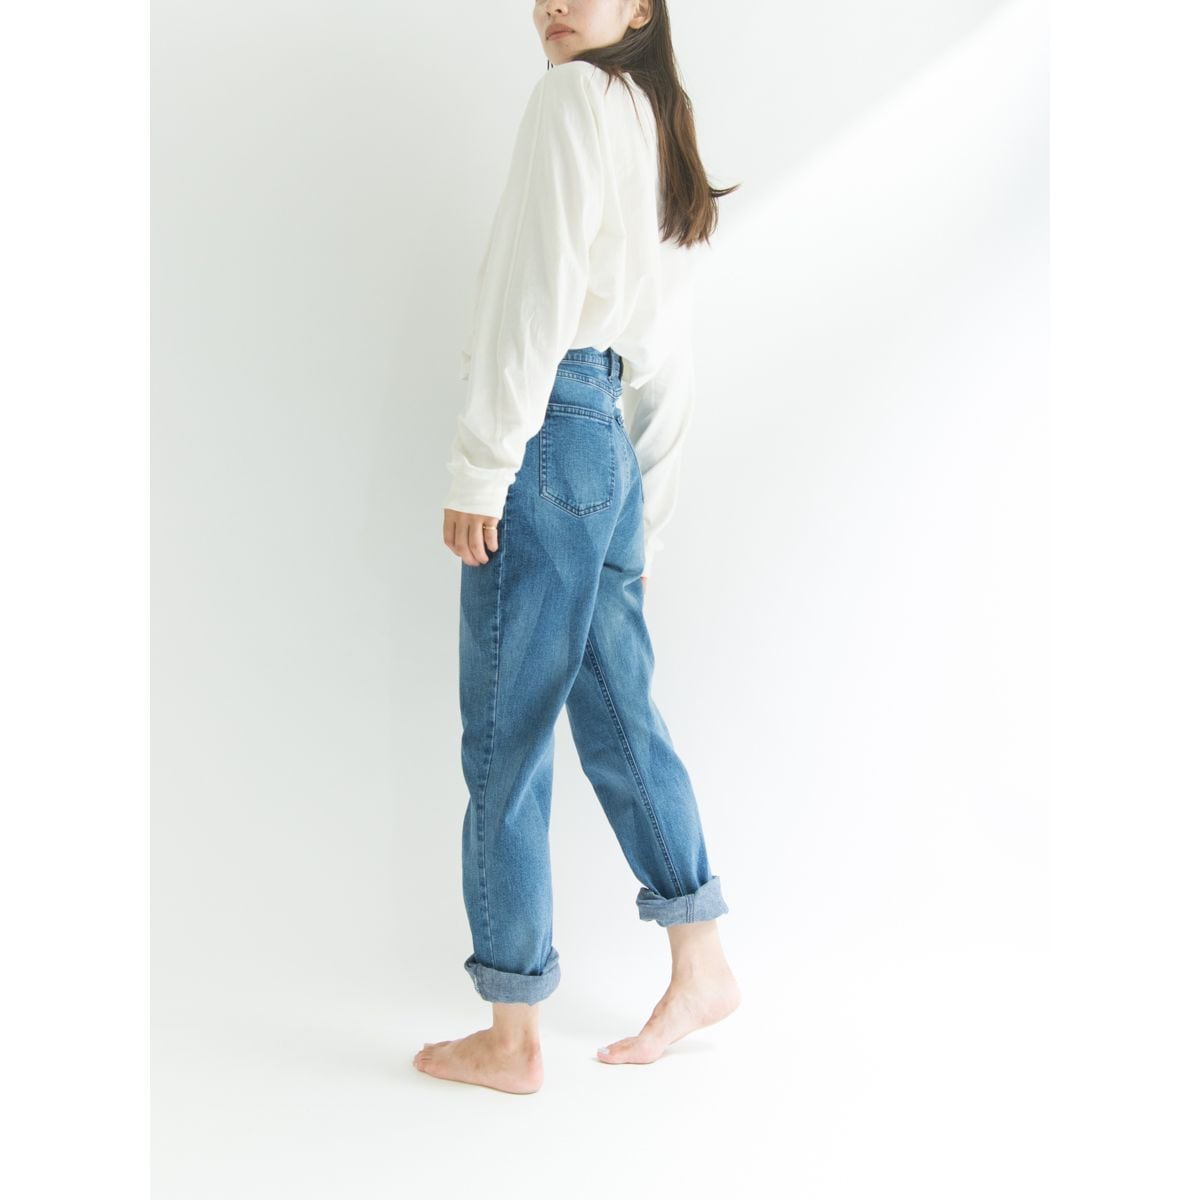 【JEANS Les Copains】 Made in Italy straight jeans（レ・コパン ストレッチジーンズ デニム）8e